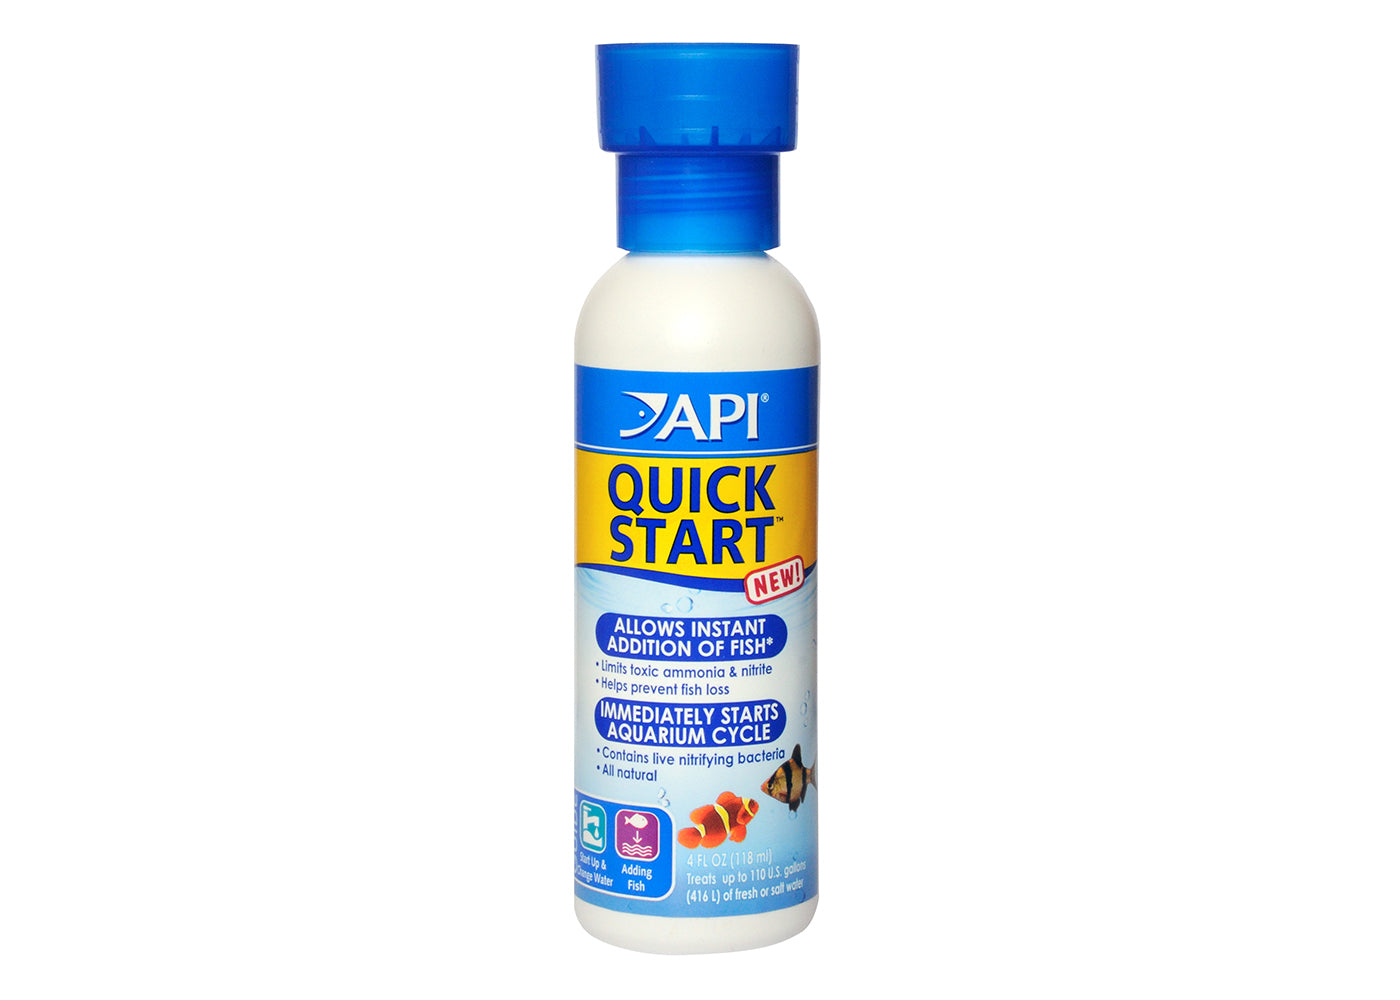 API Quick Start allows instant addition of new aquarium fish and immediately starts aquarium cycle, helps prevent fish loss, all natural